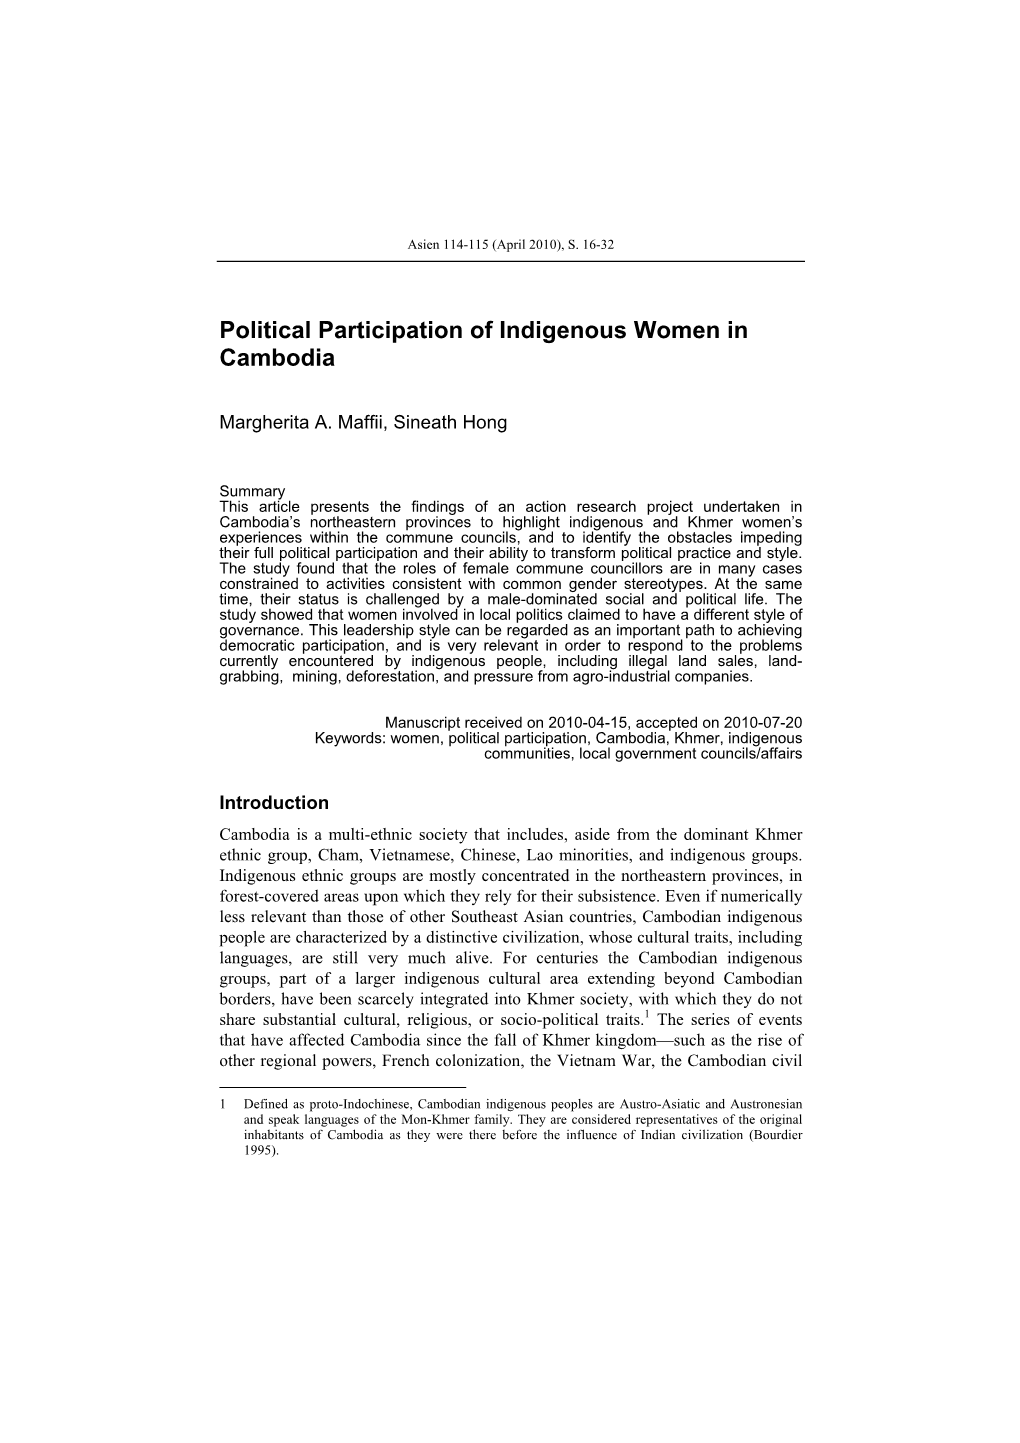 Political Participation of Indigenous Women in Cambodia